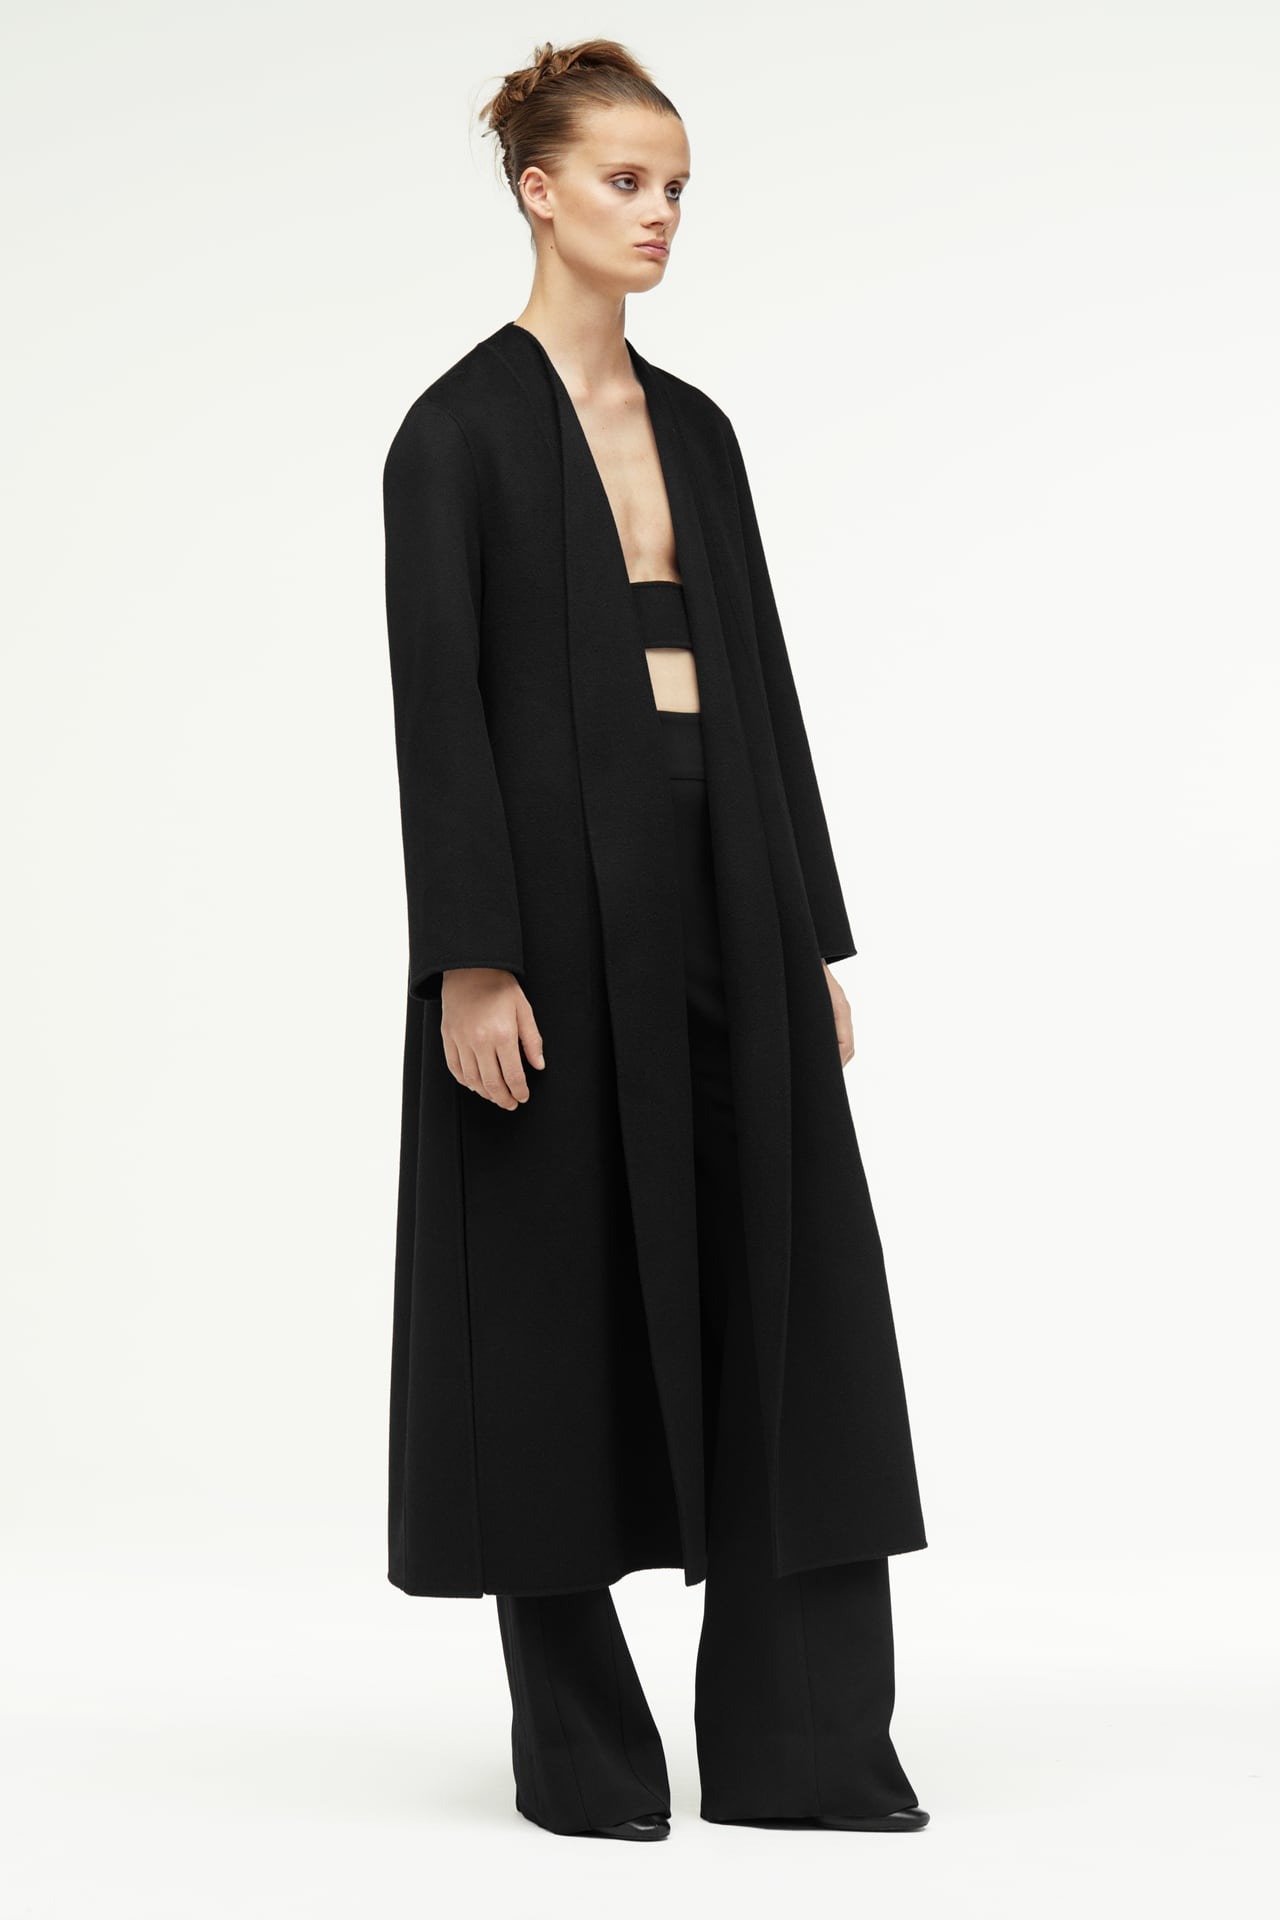 Zara Collaborates With Narciso Rodriguez | Who What Wear